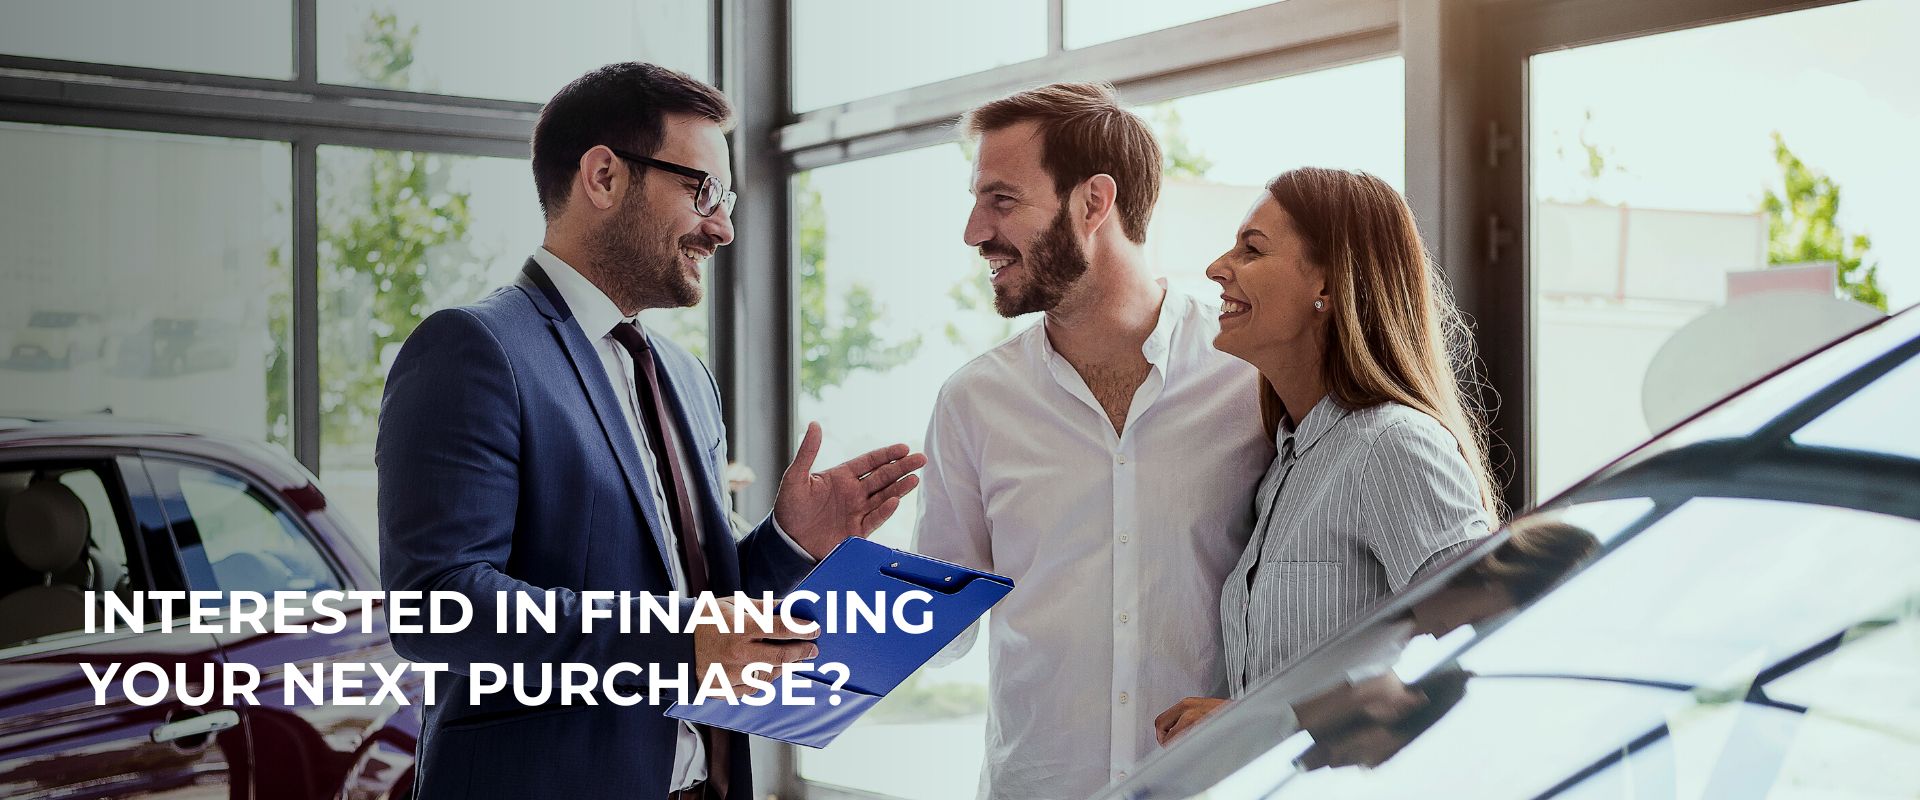 Interested in finance for your next purchase